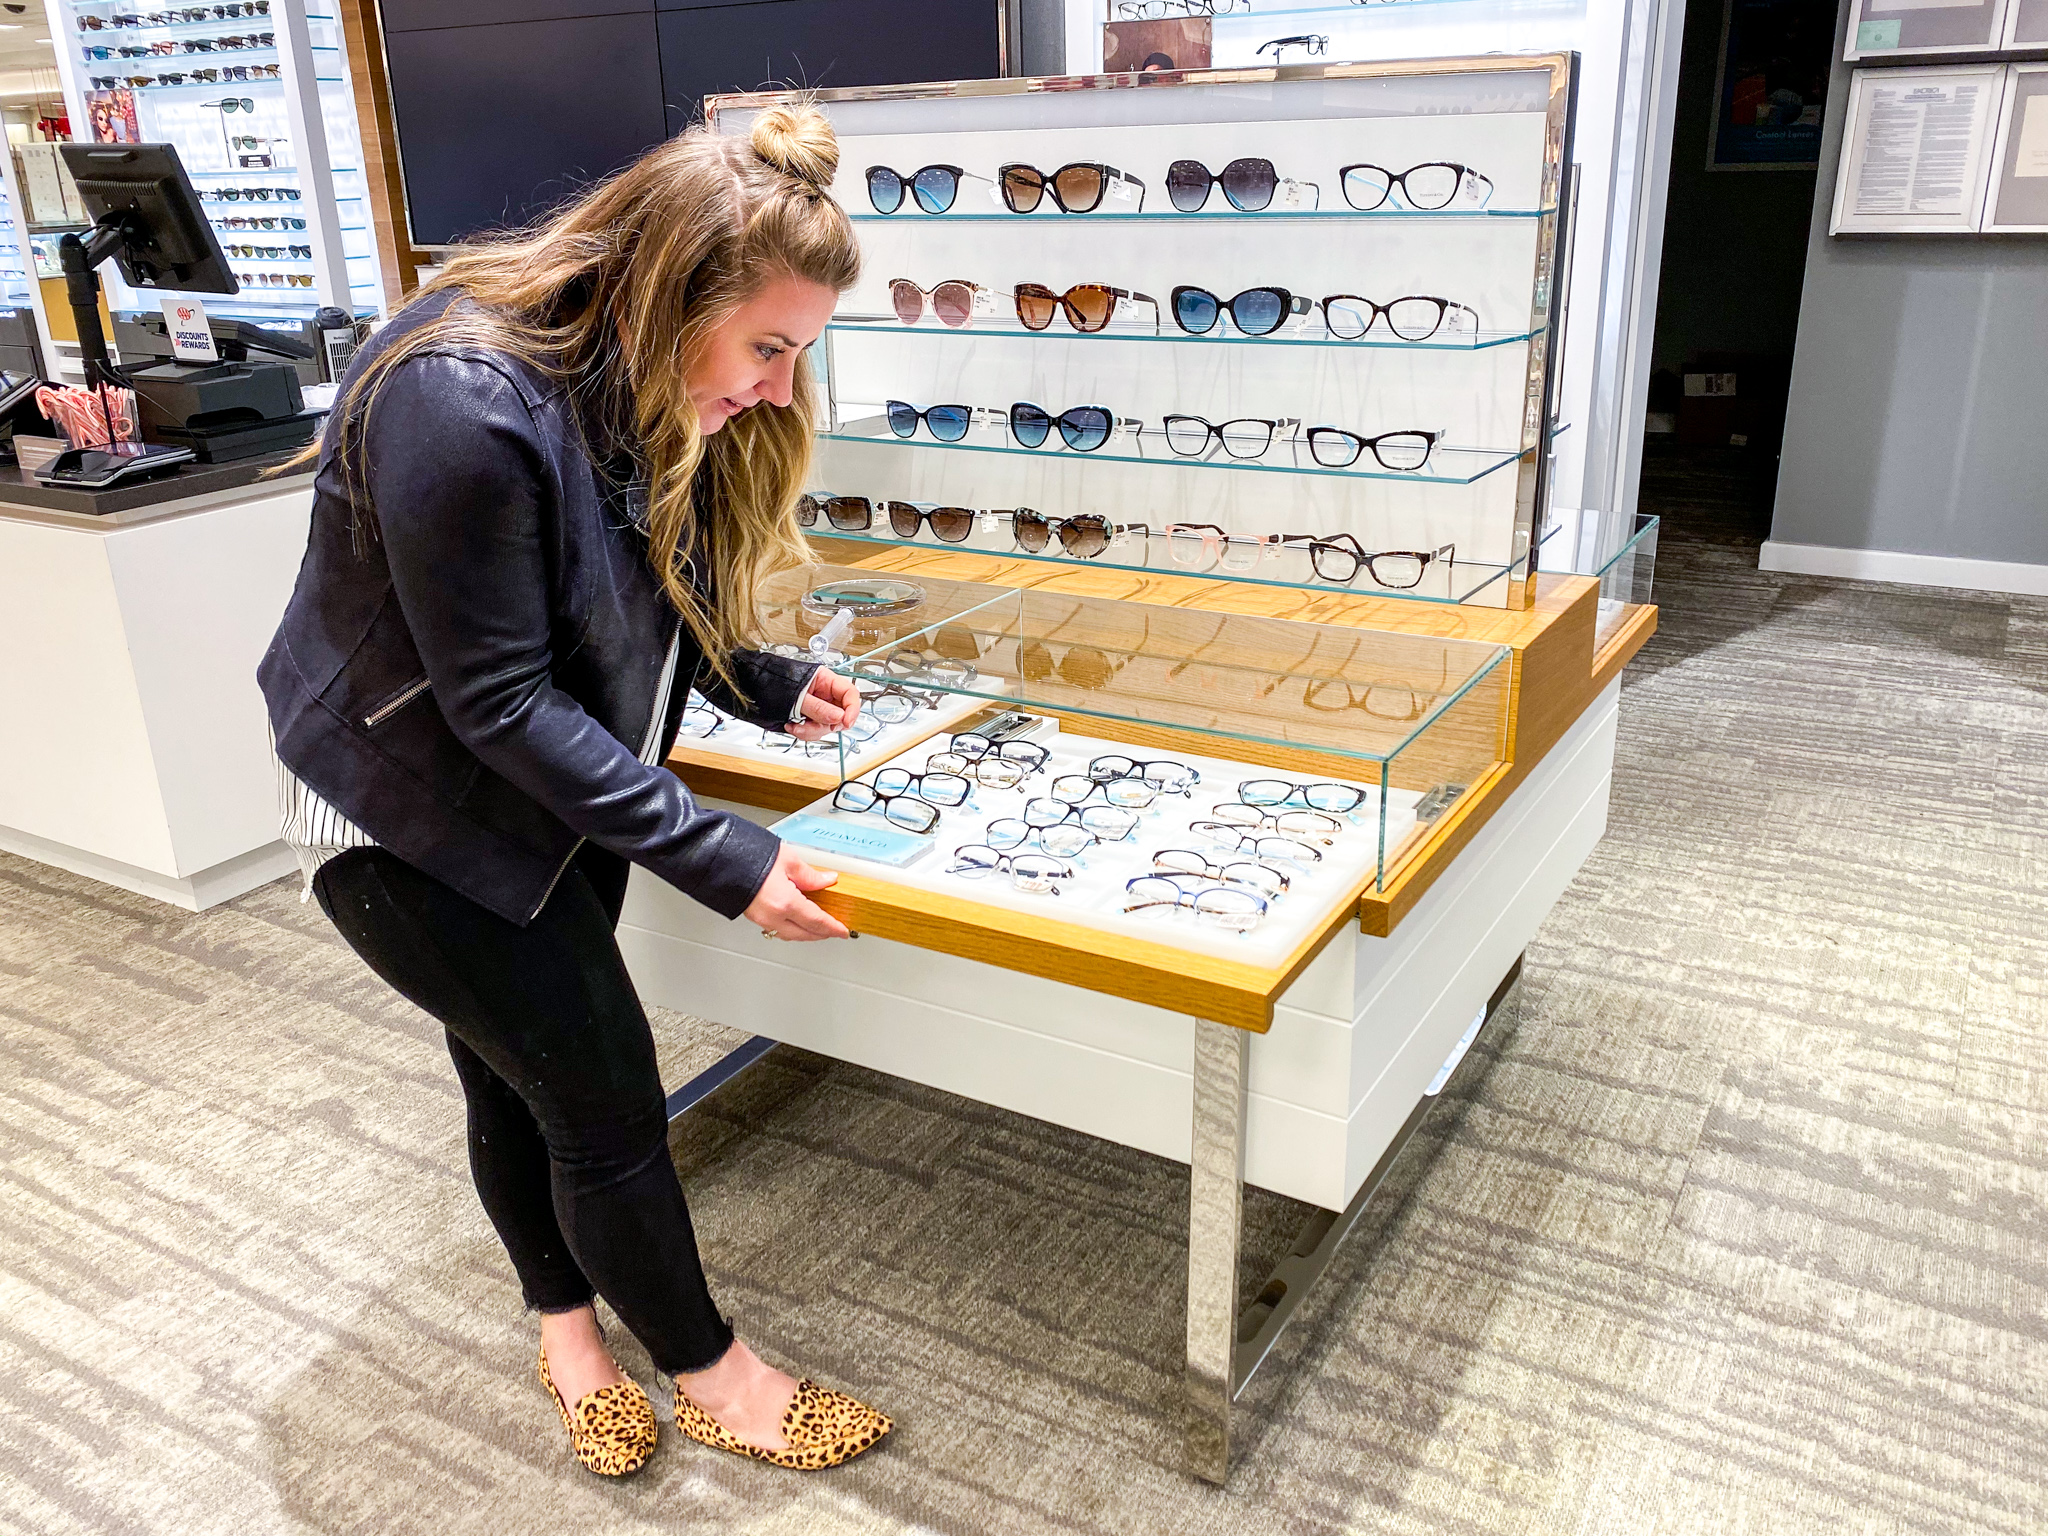 New Glasses with Lenscrafters at Macys by popular North Carolina life and style blog, Coffee Beans an Bobby Pins: image of a woman looking at glasses in Lenscrafters at Macys.